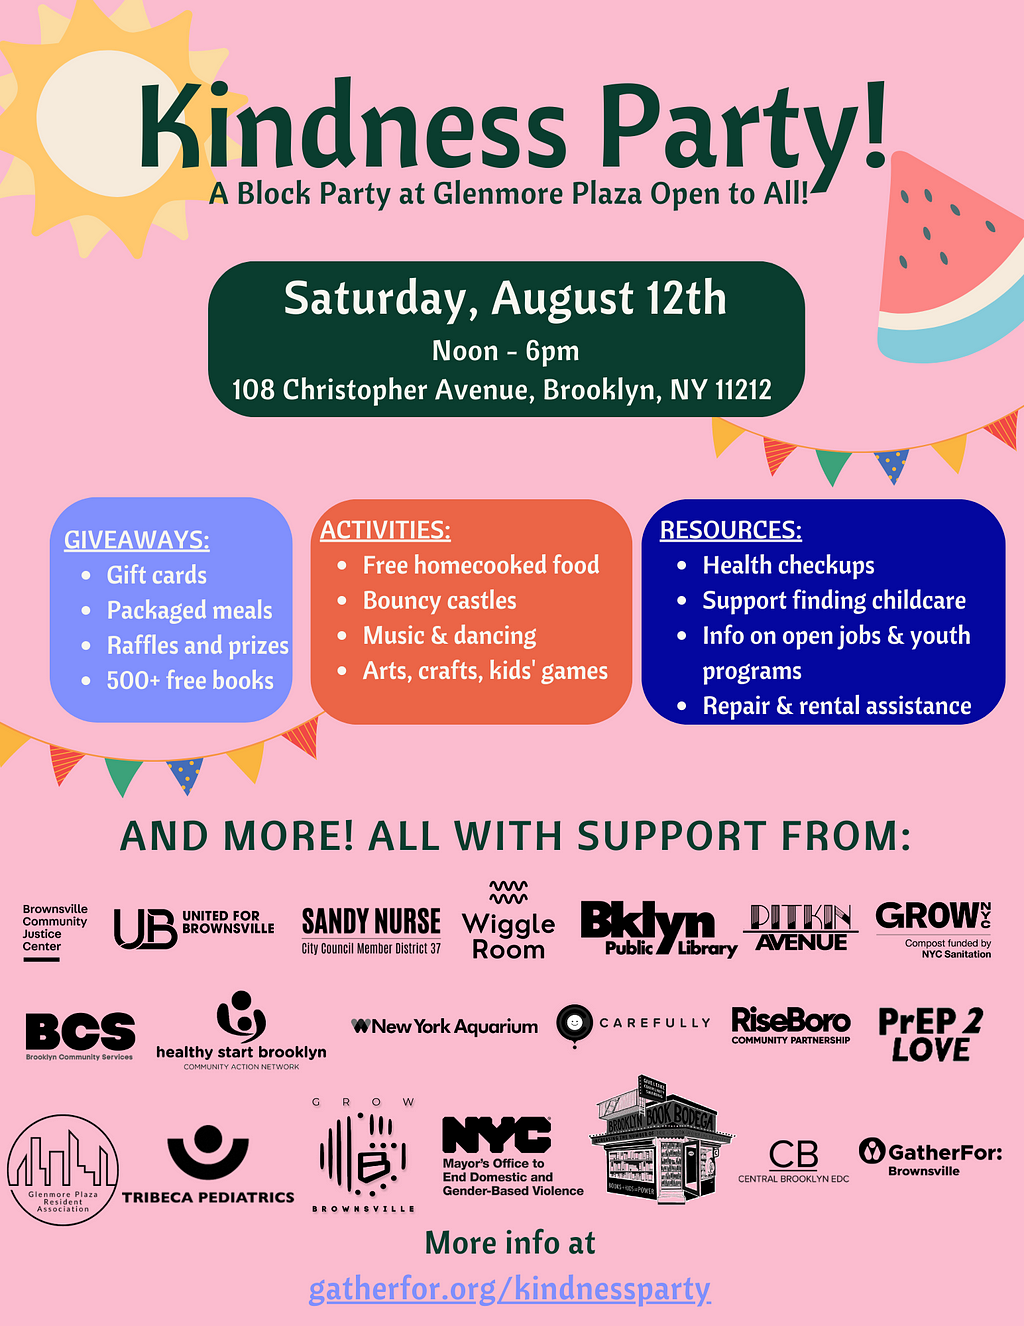 A flyer about Kindness Party, taking place on August 12, 2023 from Noon-6pm at Glenmore Plaza (108 Christopher Avenue). There will be giveaways including gift cards, packaged meals, raffles, and 500+ free books. There will be free homecooked food, bouncy castles, music & dancing, arts, crafts, and kids’ games. There will also be free health checkups, support finding childcare, information on open jobs and youth programs, and assistance with getting repairs done and with paying rent.